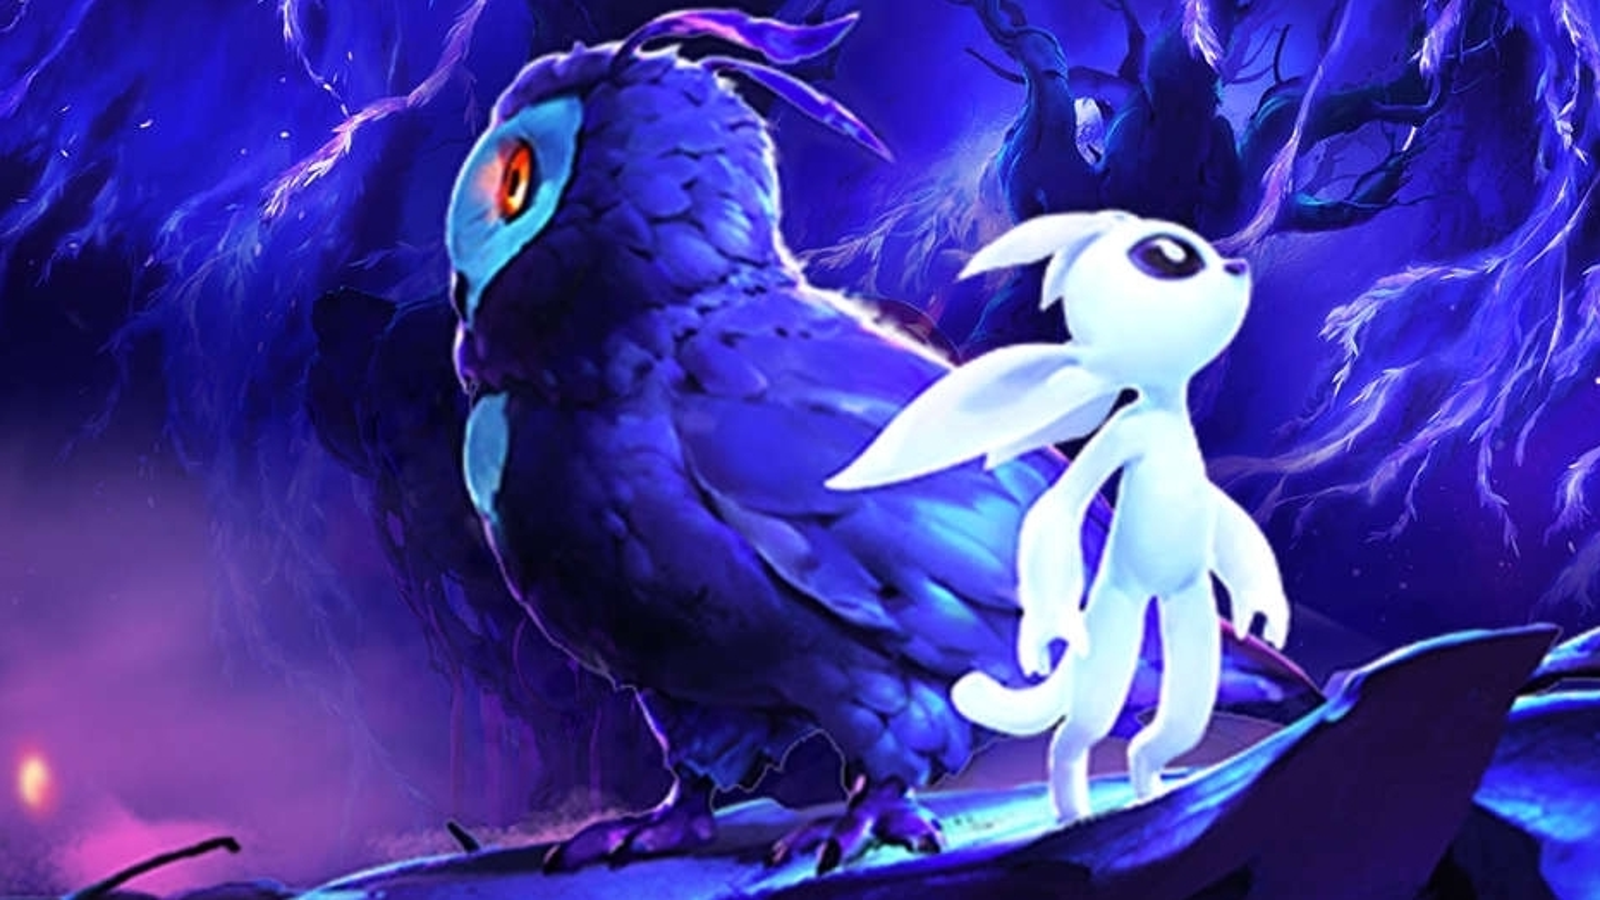 Ori And The Will Of The Wisps Is Coming To Nintendo Switch Today